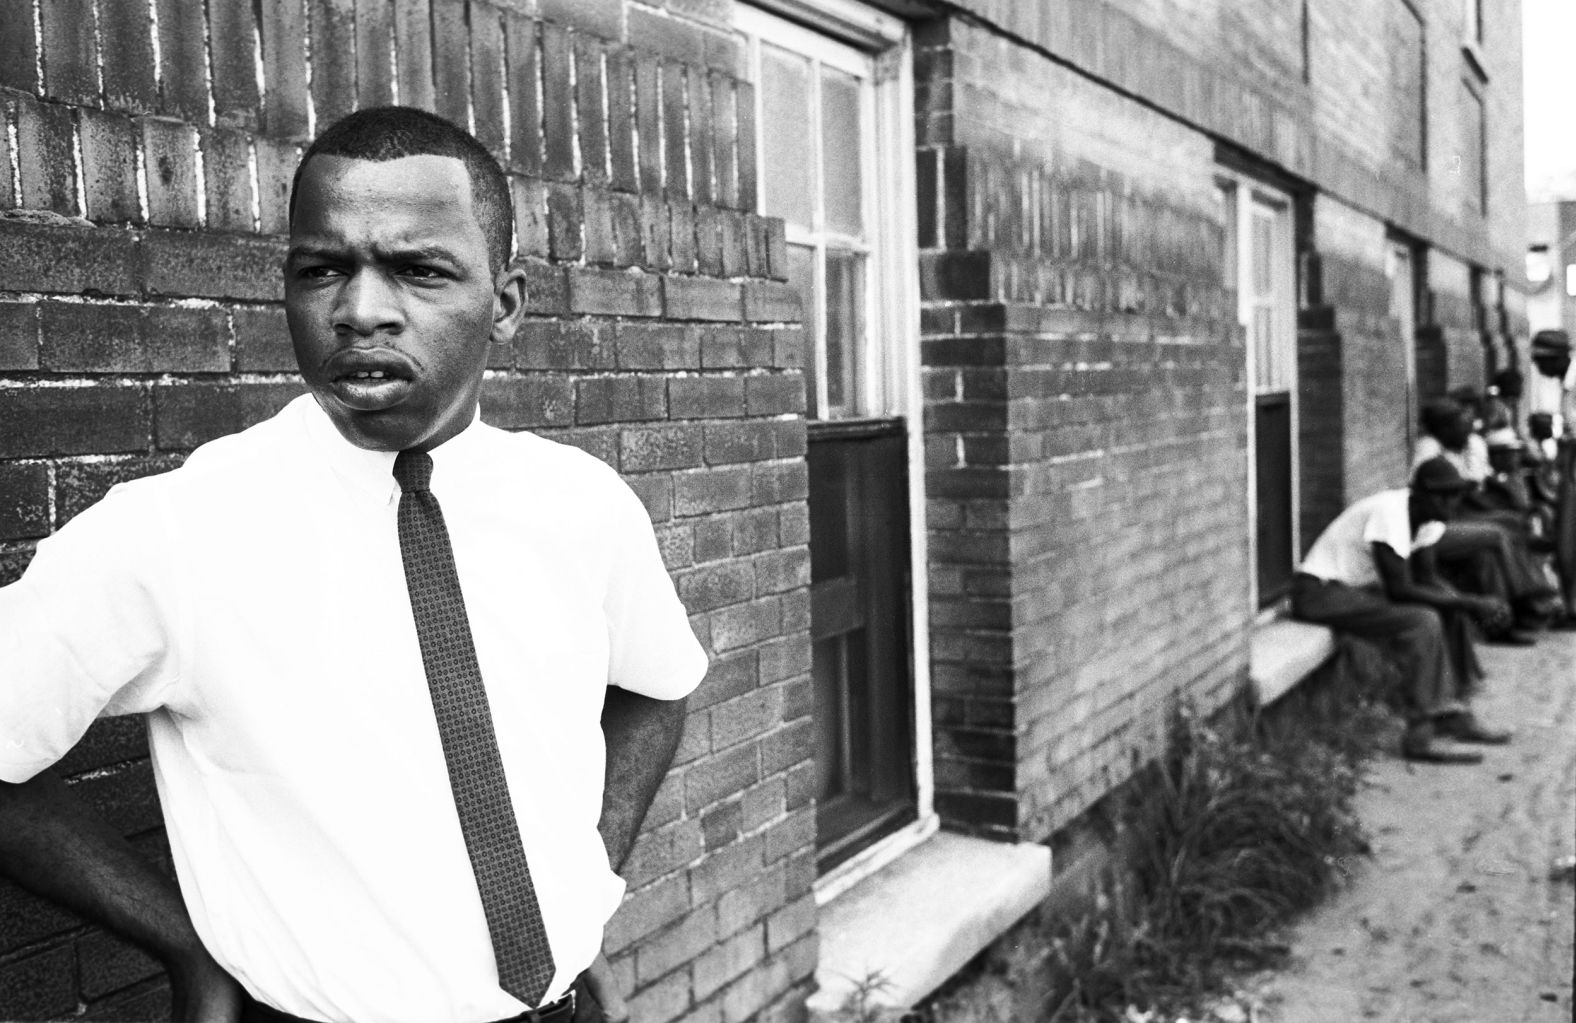 Civil rights activist John Lewis is photographed in Clarksdale, Mississippi, in 1963. This photo was later on the cover of Time magazine when Lewis, a longtime activist and US congressman, died in 2020. "It's a picture of someone who knows who he is, knows what he has to do, and for the rest of his life, after this picture, he did it," <a href="index.php?page=&url=https%3A%2F%2Ftime.com%2F5869243%2Fjohn-lewis-cover%2F" target="_blank" target="_blank">Schapiro told Time.</a>